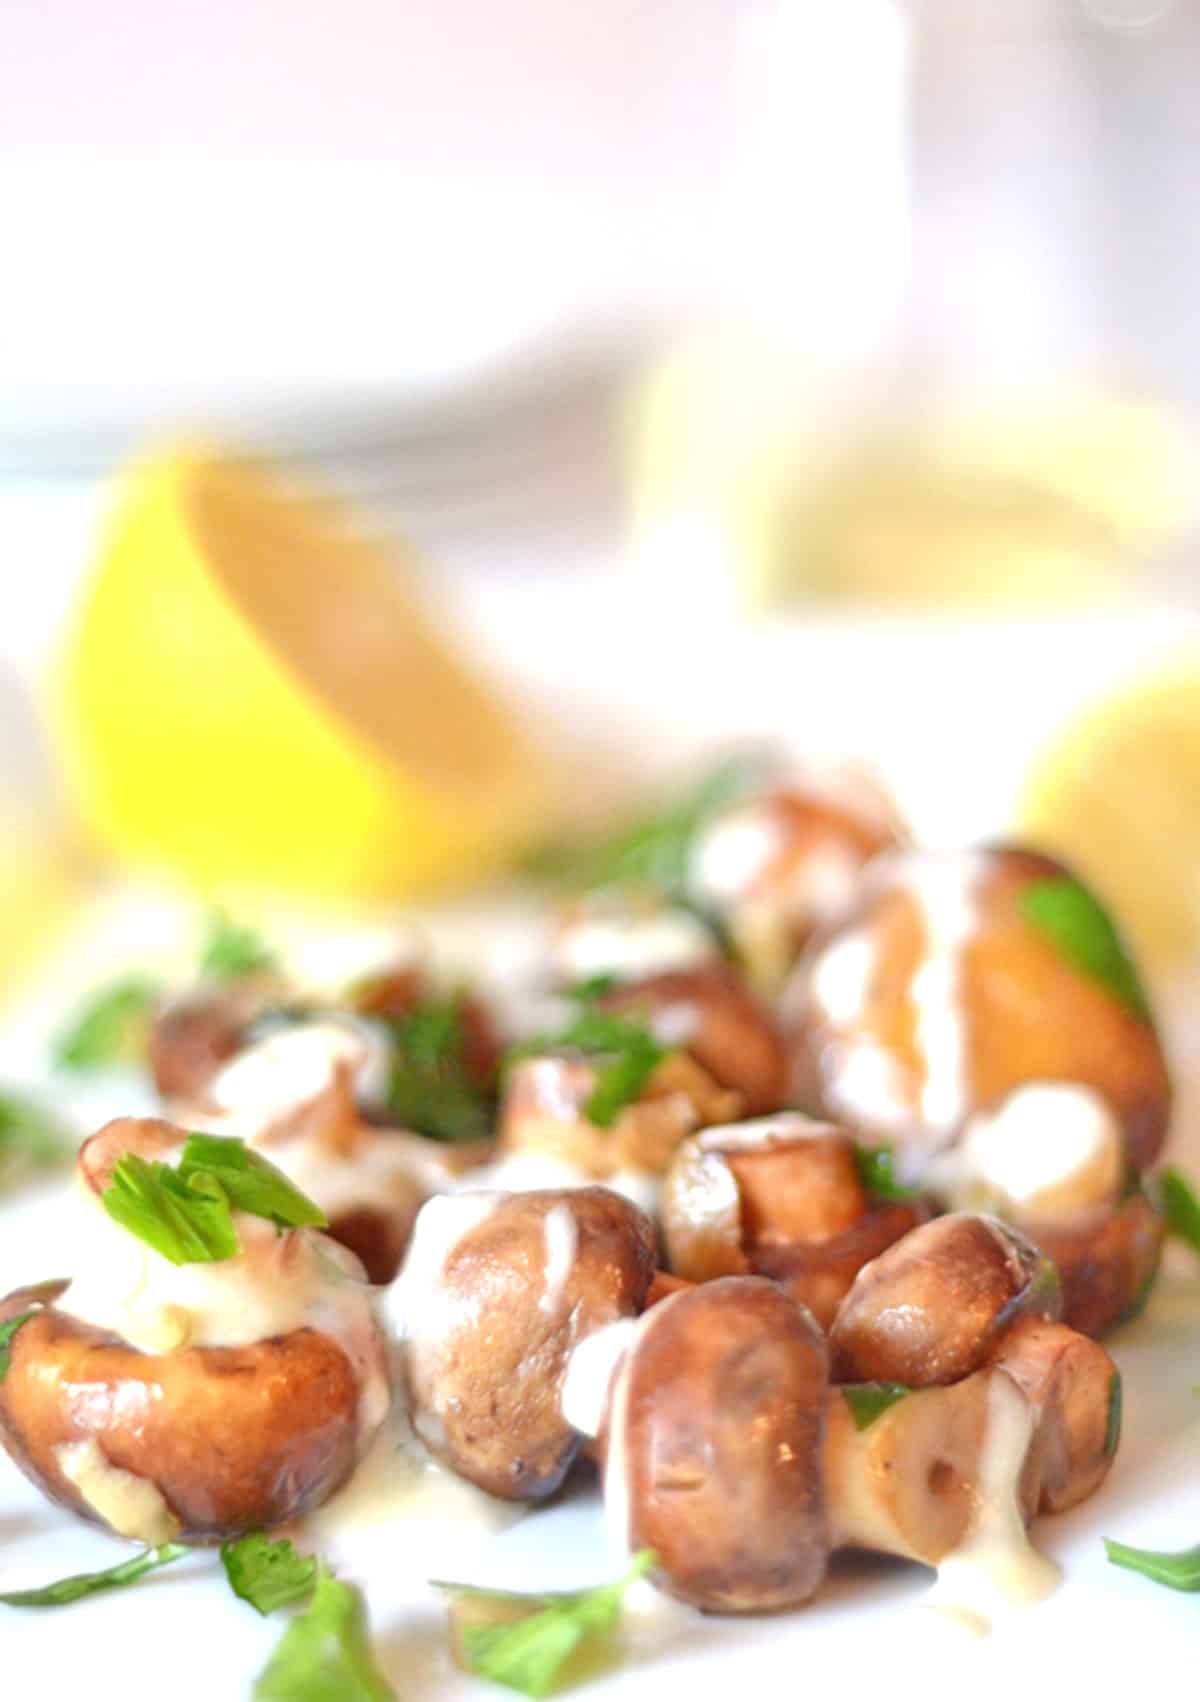 A plate of button mushrooms covered in cream.